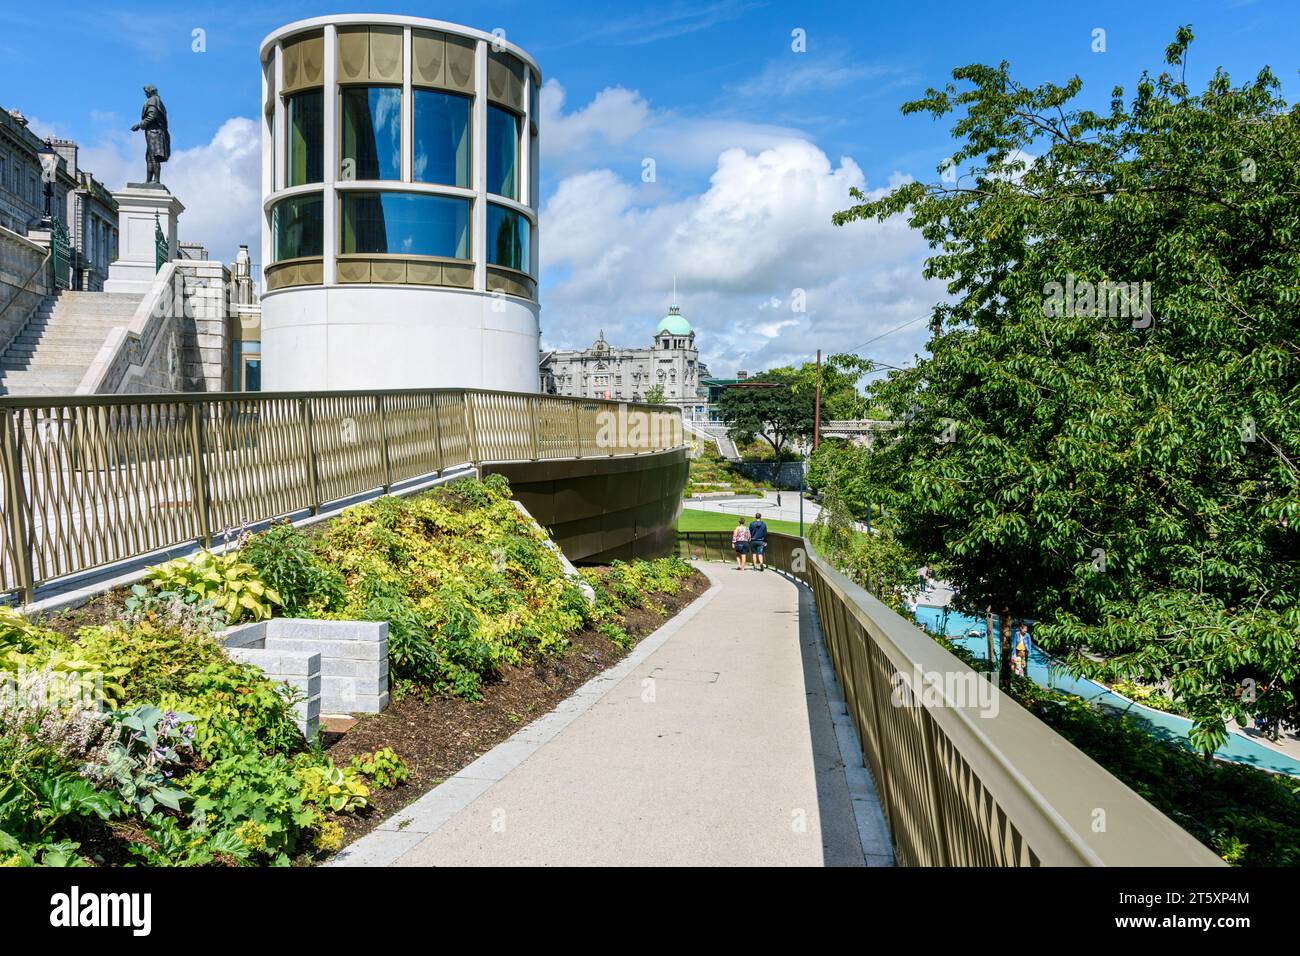 One of the Pavilions seen from an elevated walkway in the Union Terrace Gardens, Aberdeen, Scotland, UK Stock Photo